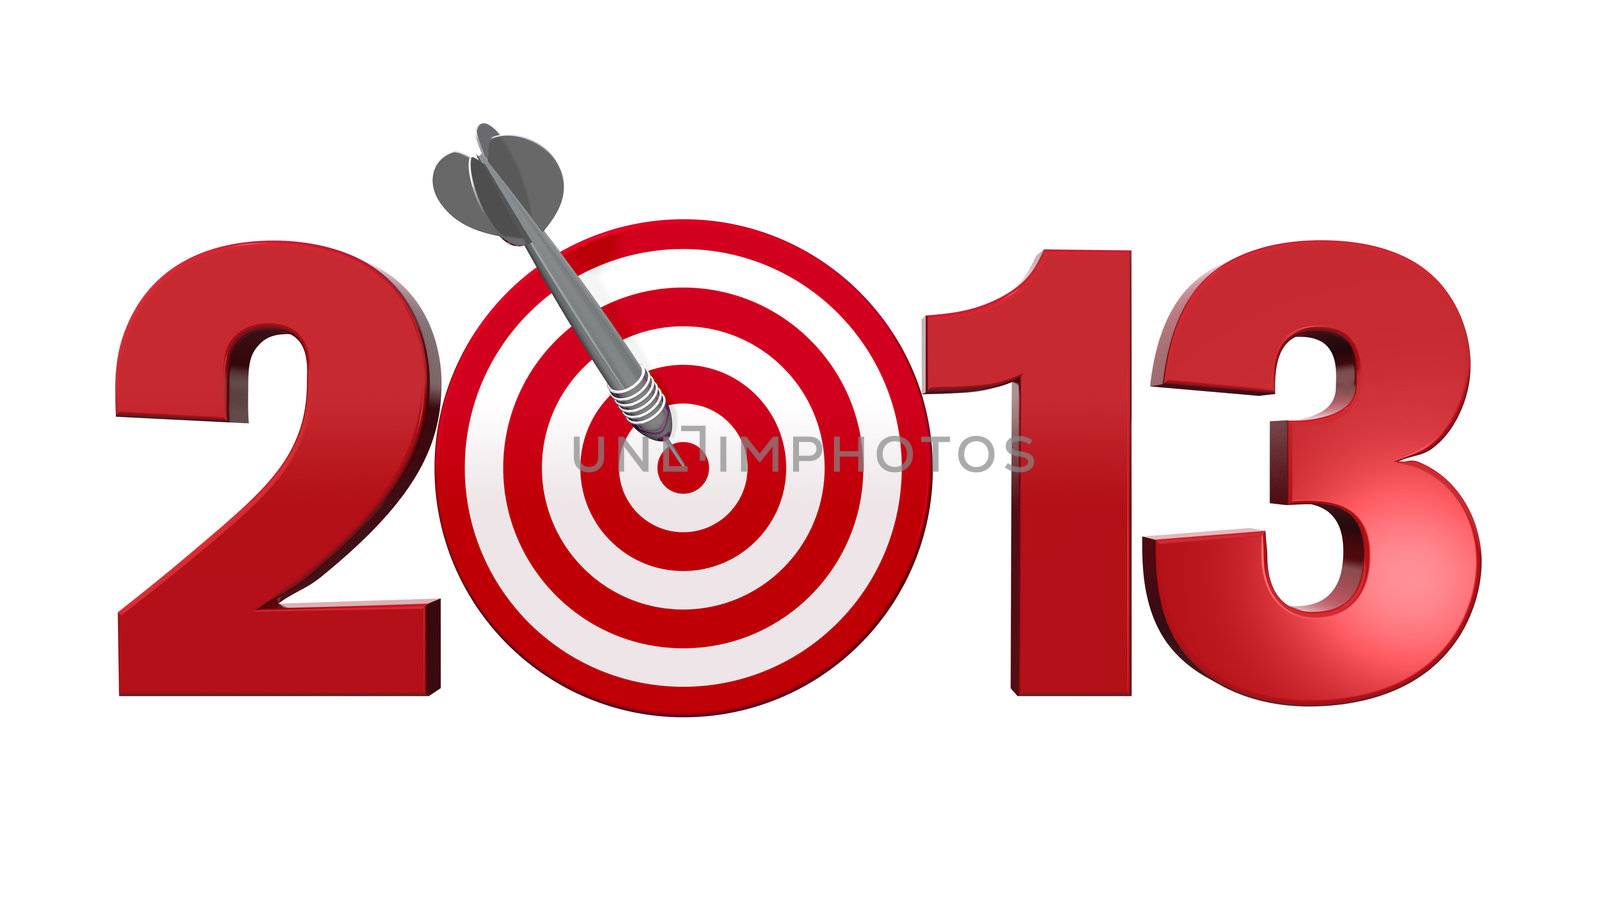 Next New Year 2013. Number with red and white target, one dart hits the center of the target - 3d render illustration - success in business concept.